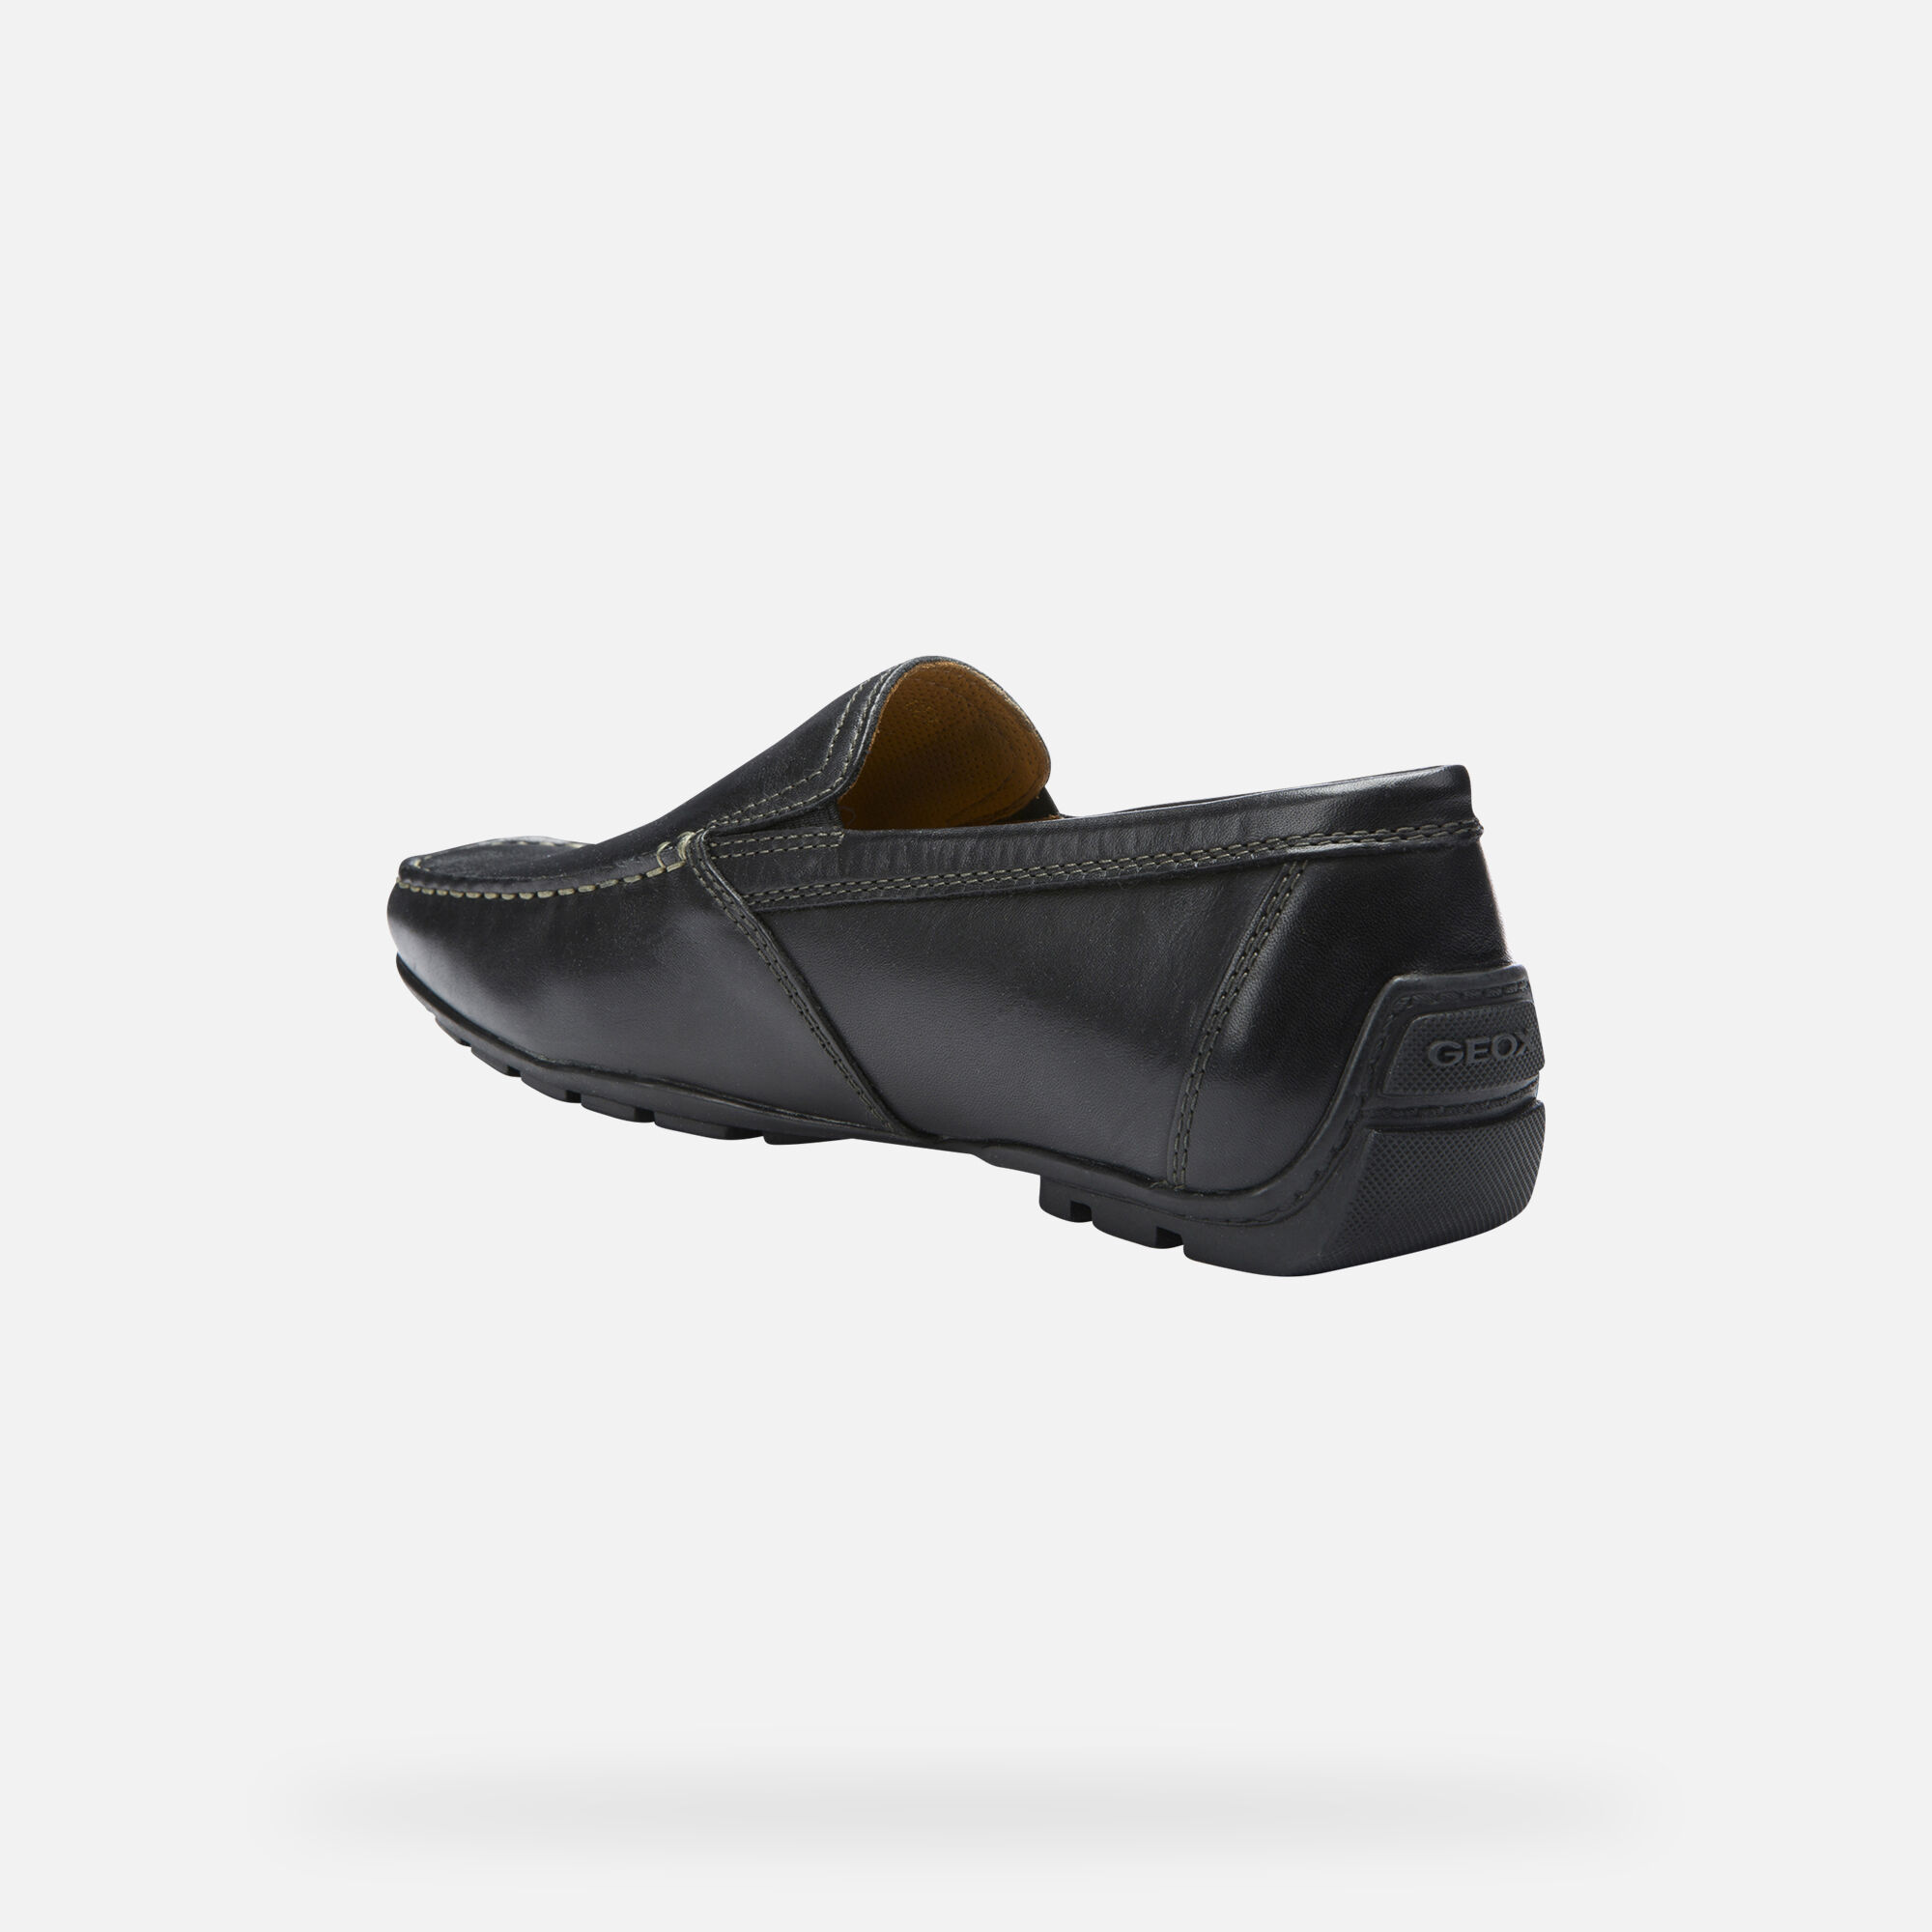 geox black loafers